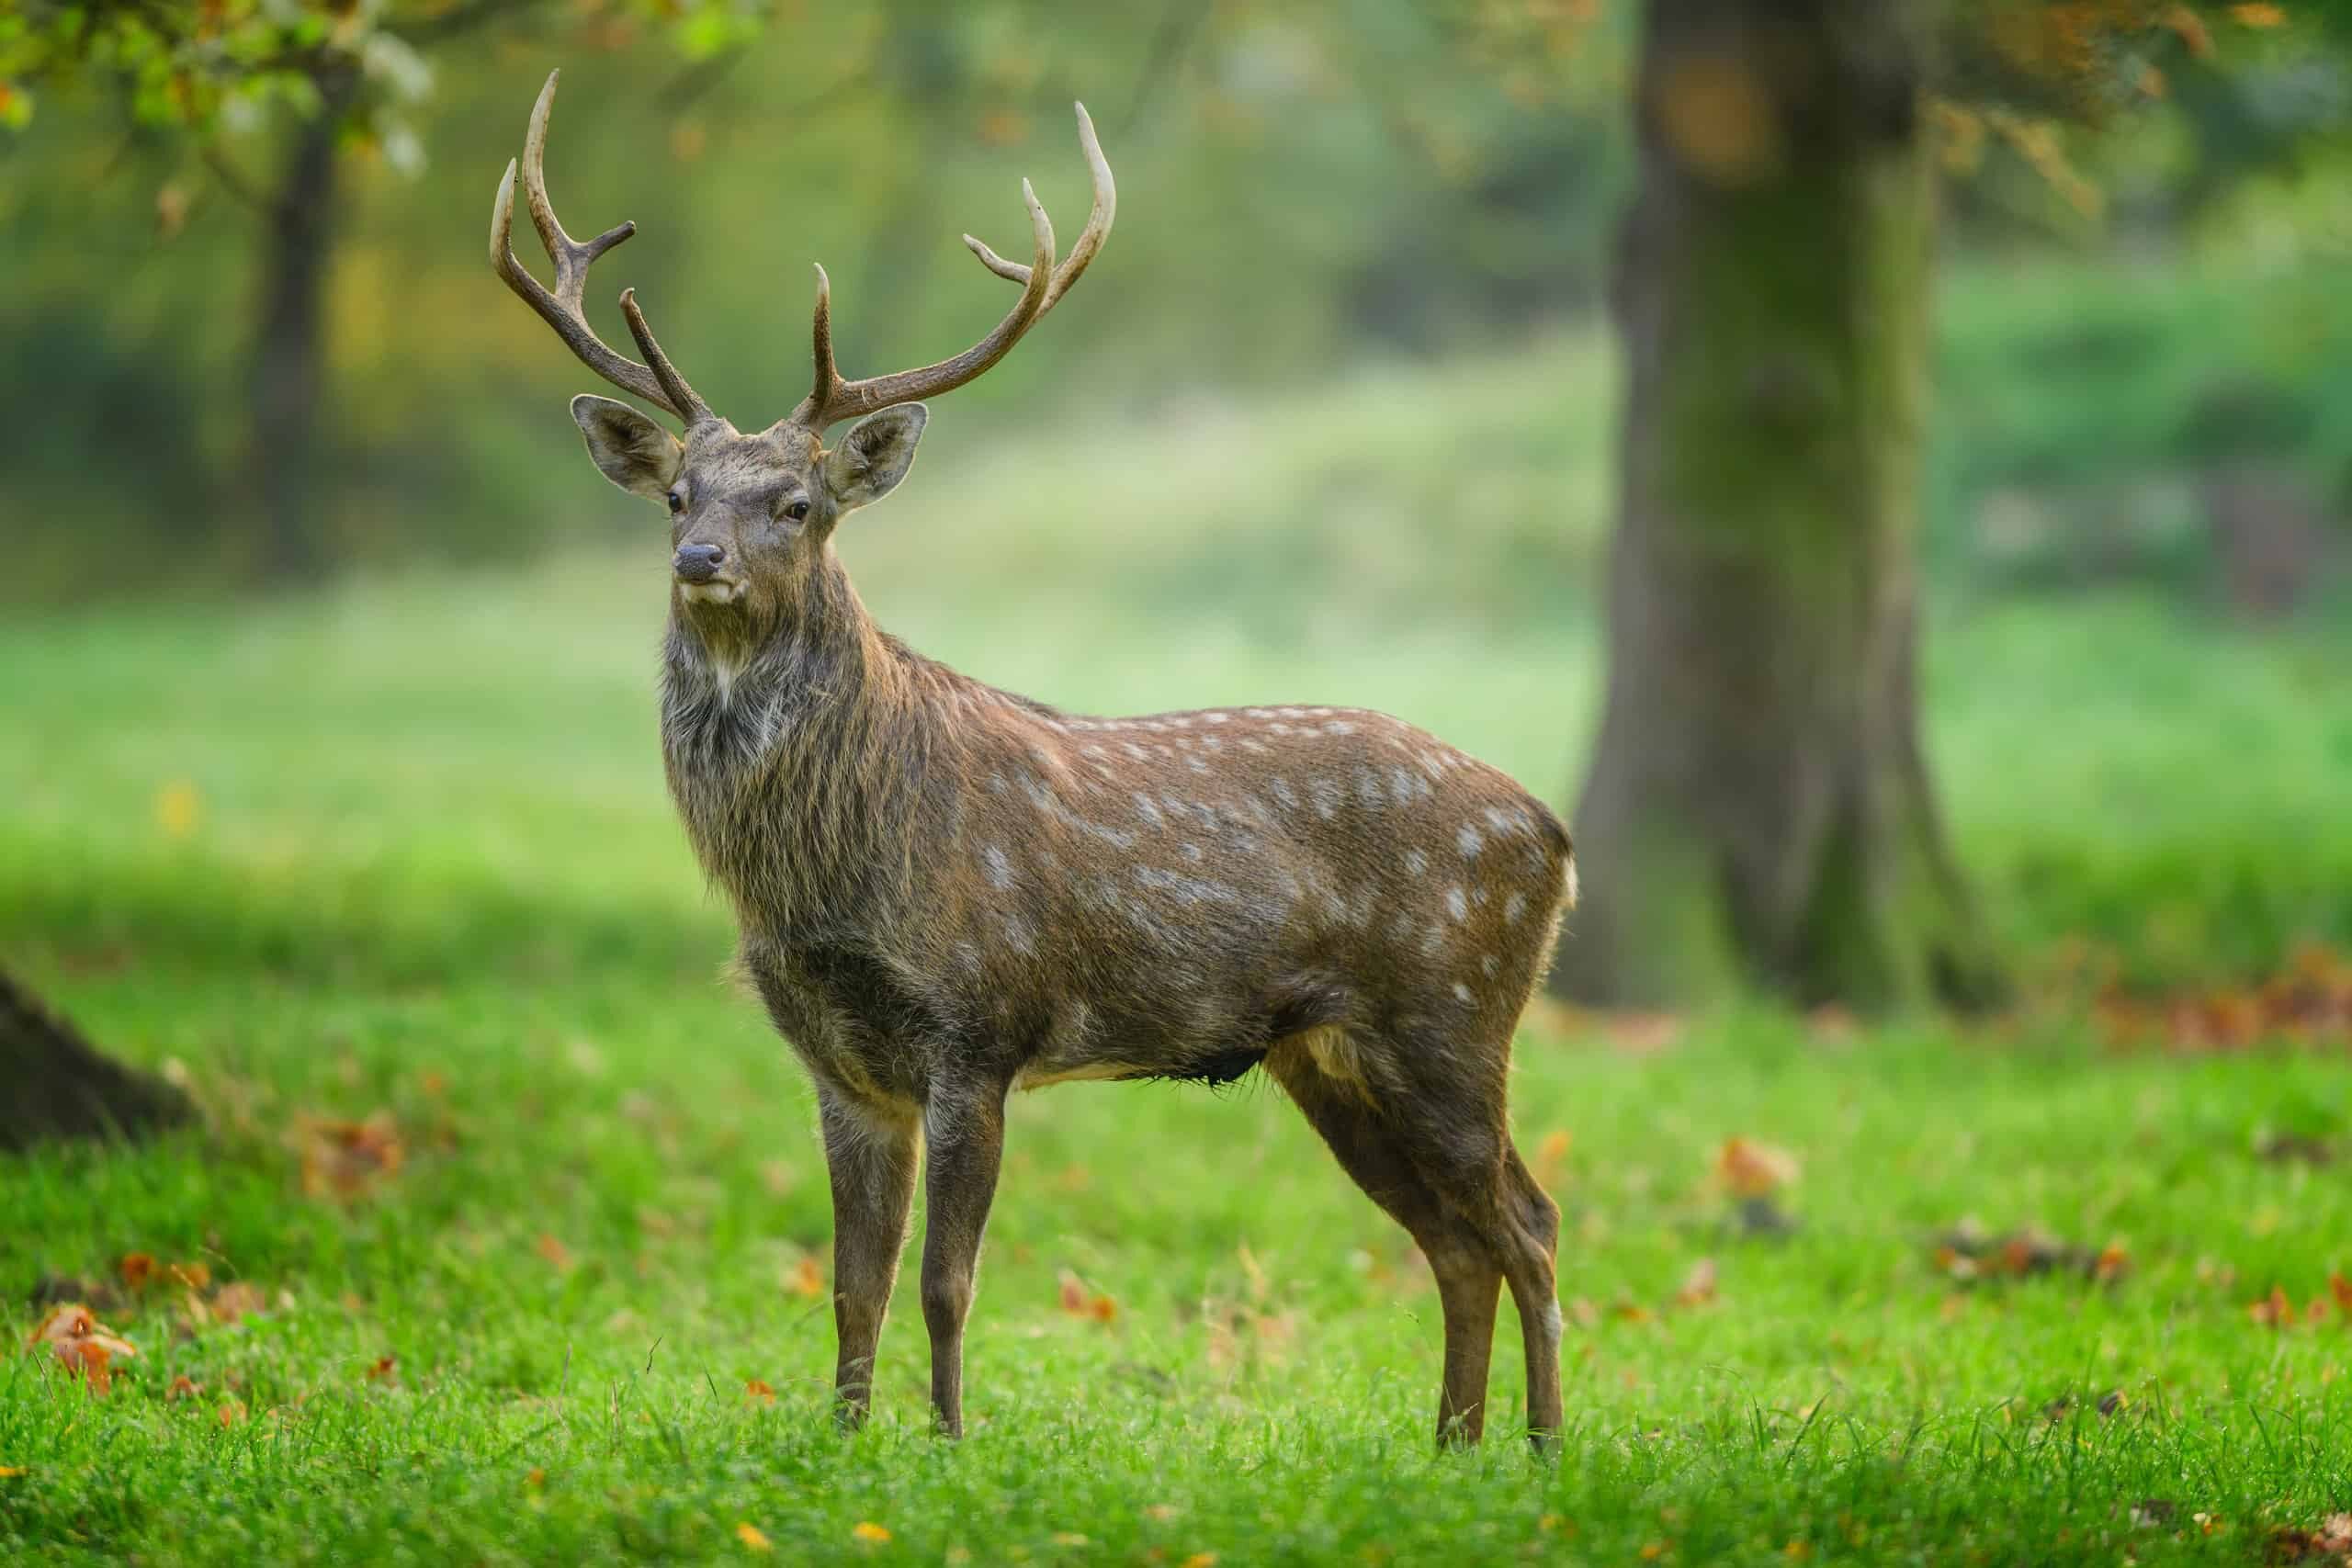 3. Cracking the Code: Decoding Deer Sleep Patterns and Habits